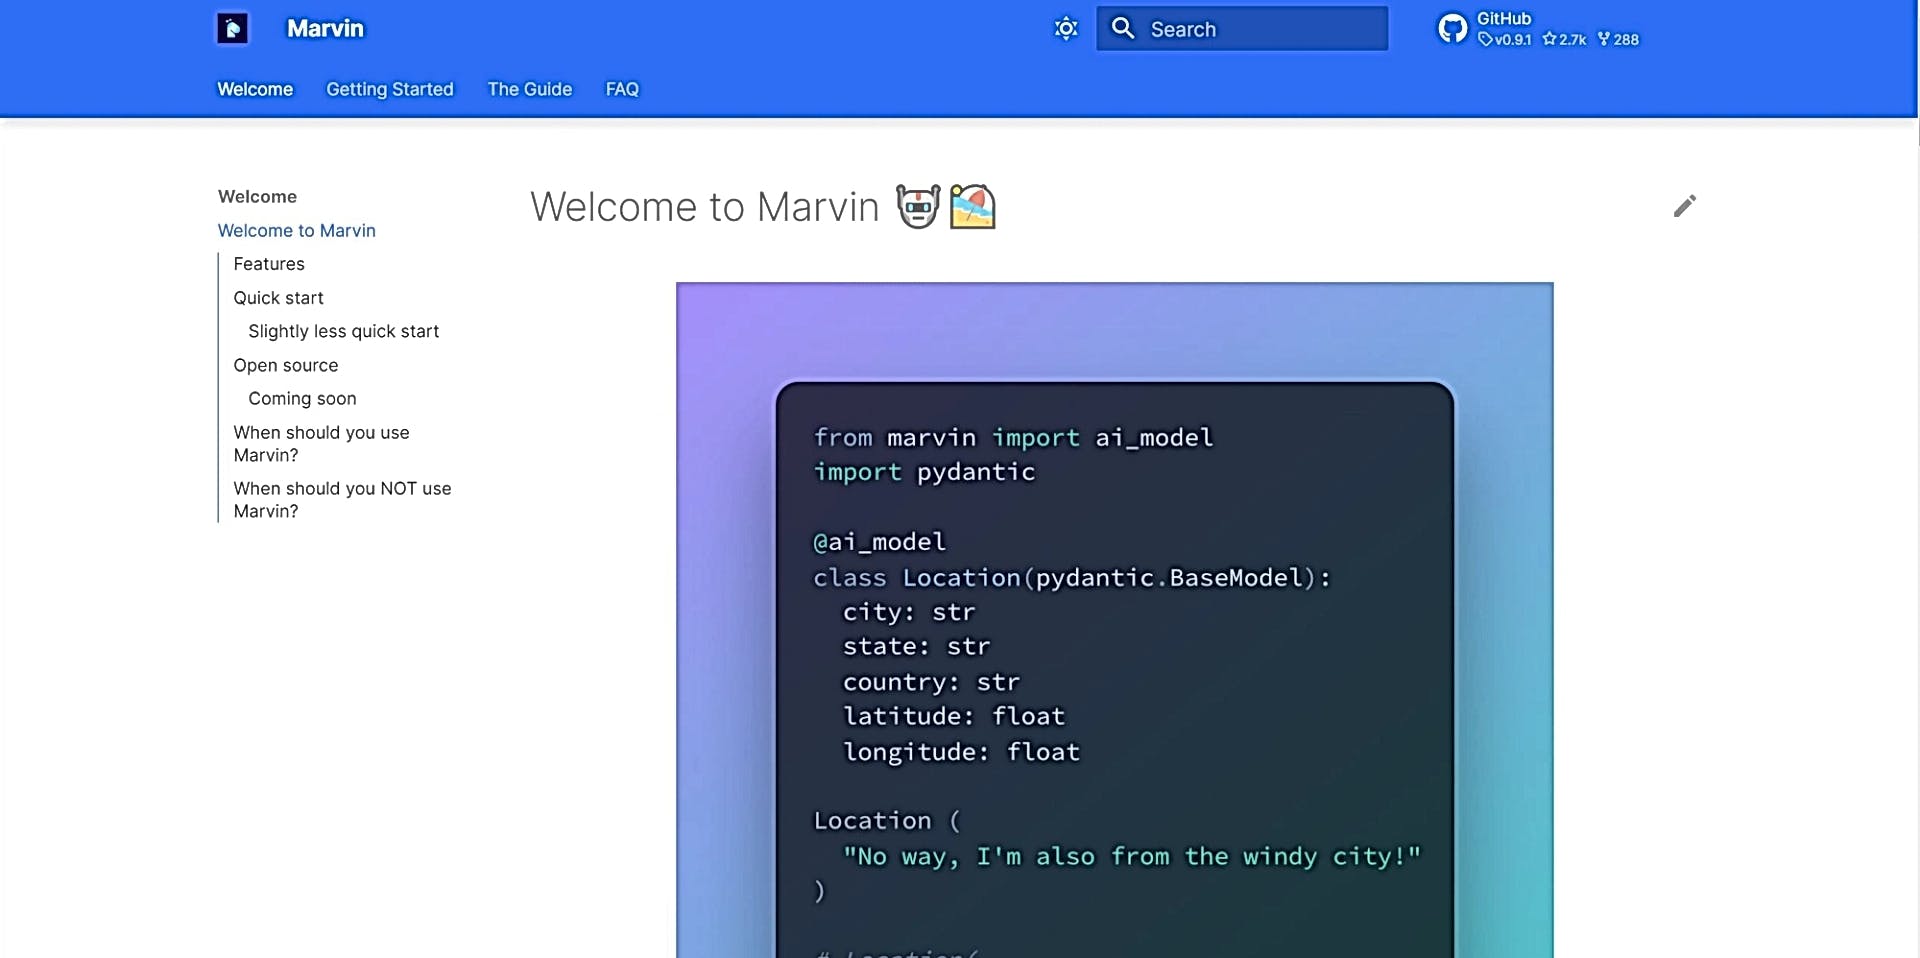 Marvin featured